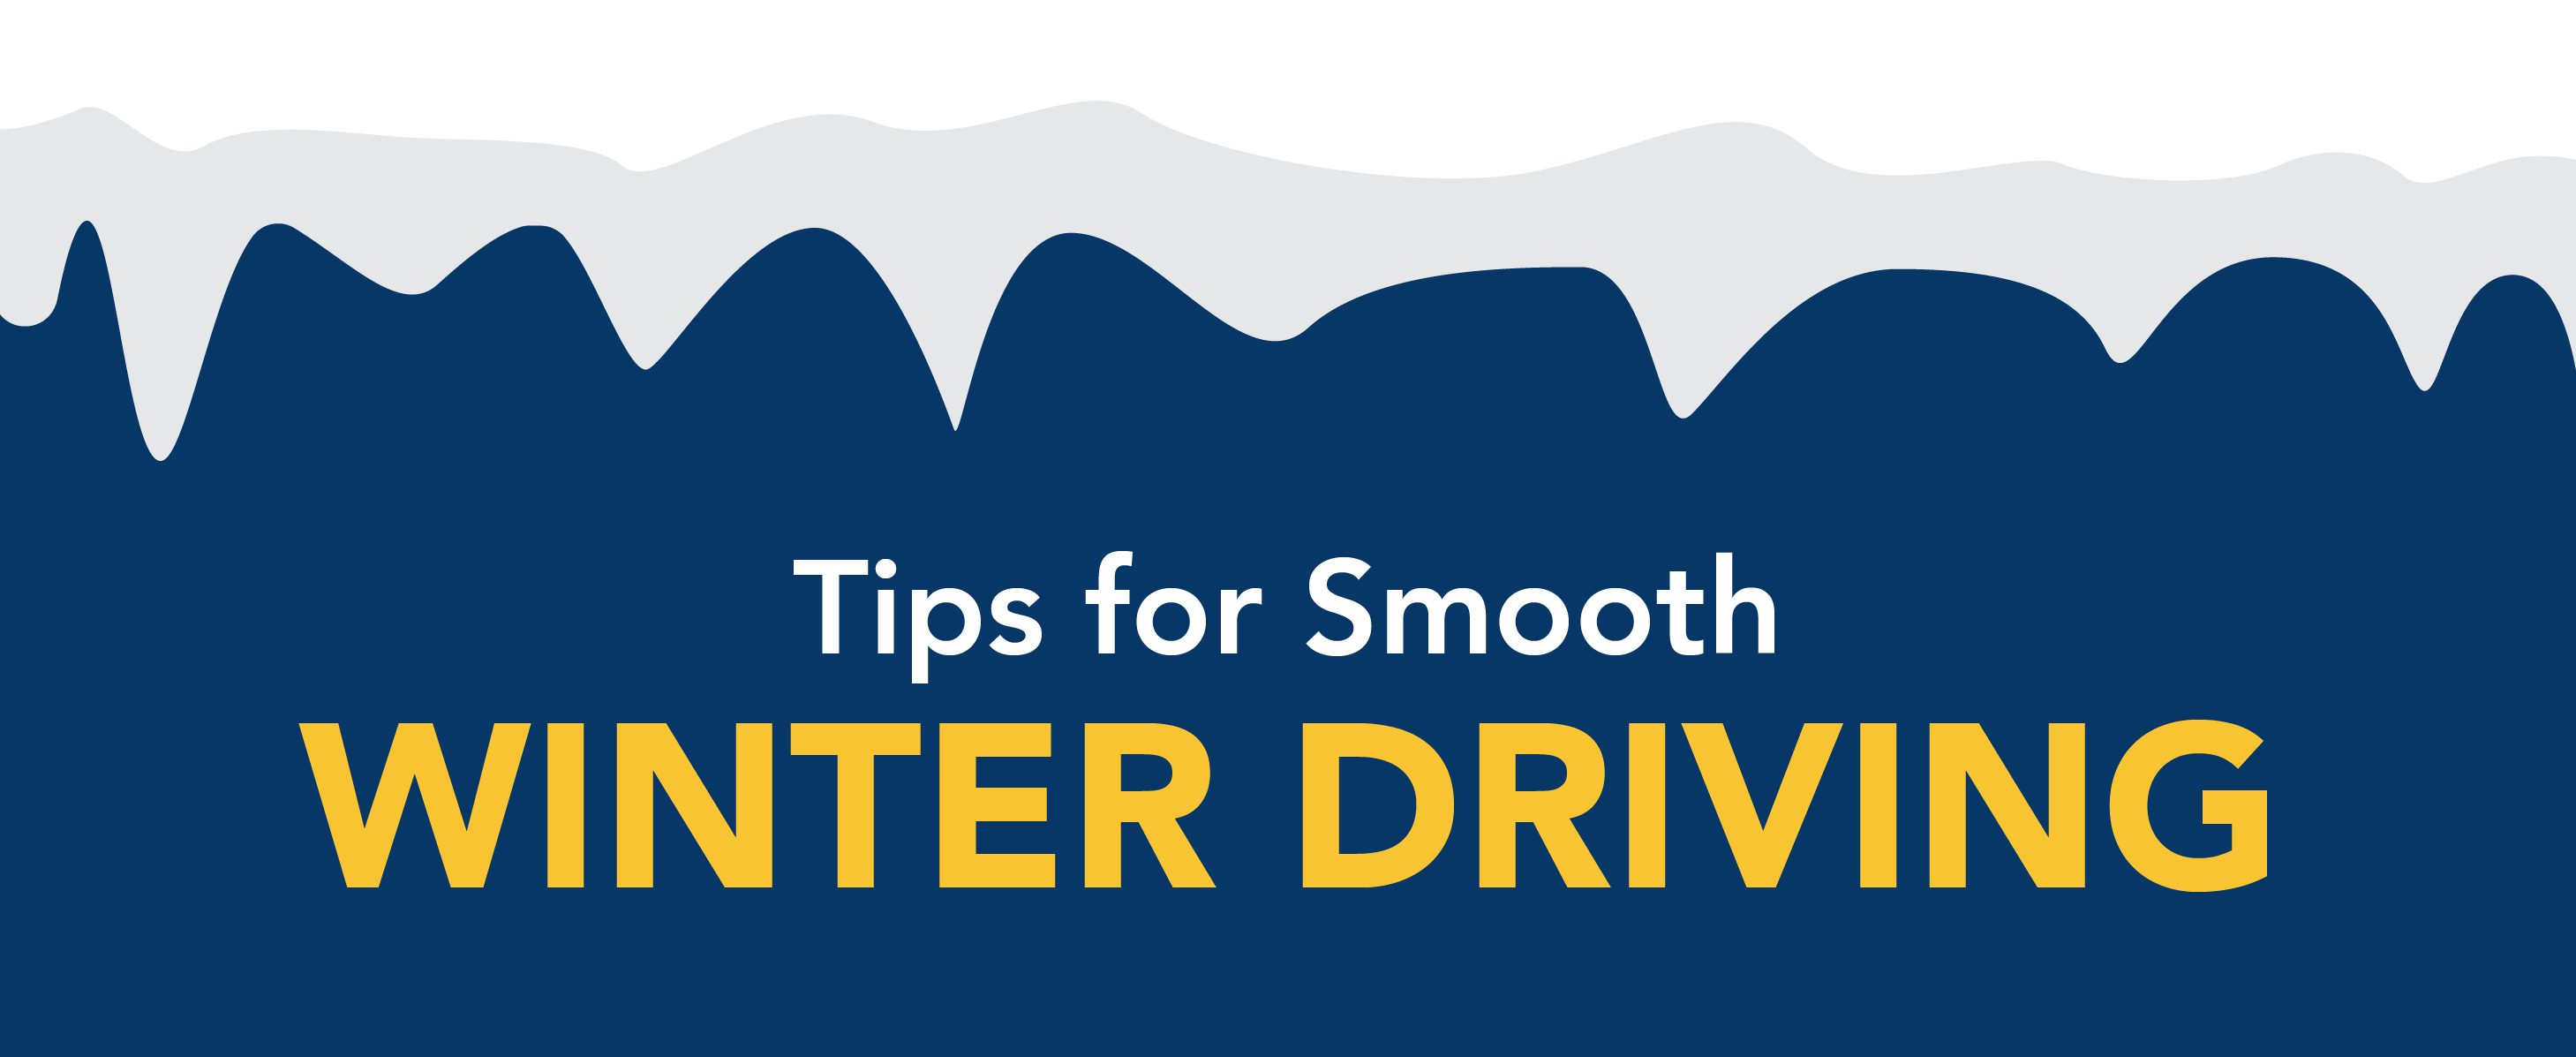 Tips for Smooth Winter Driving